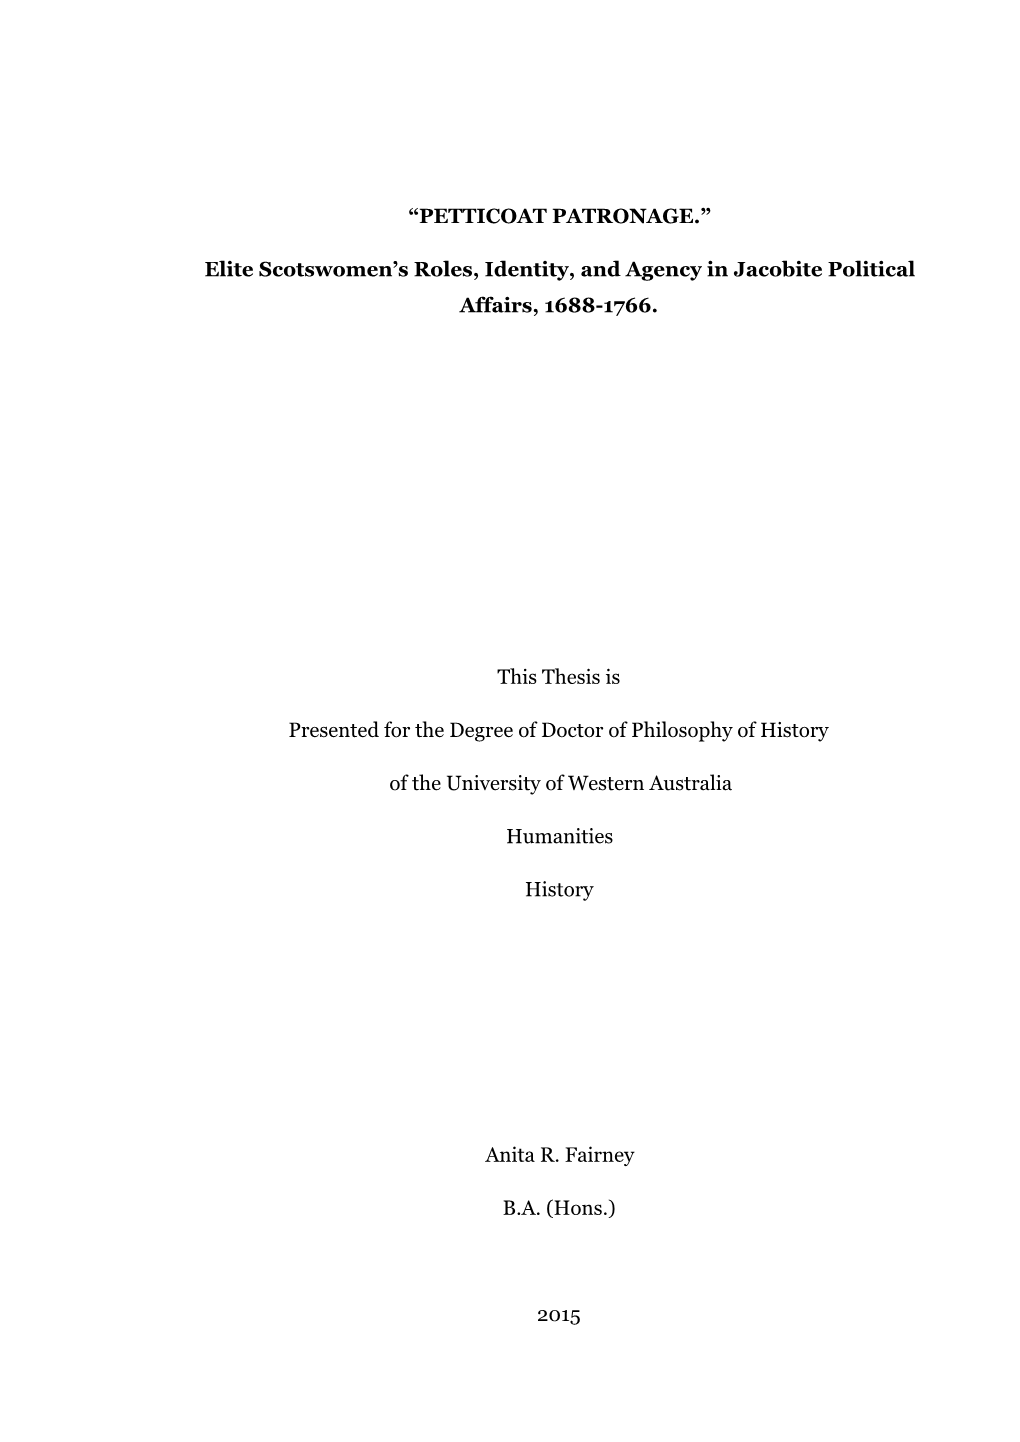 Elite Scotswomen's Roles, Identity, and Agency in Jacobite Political